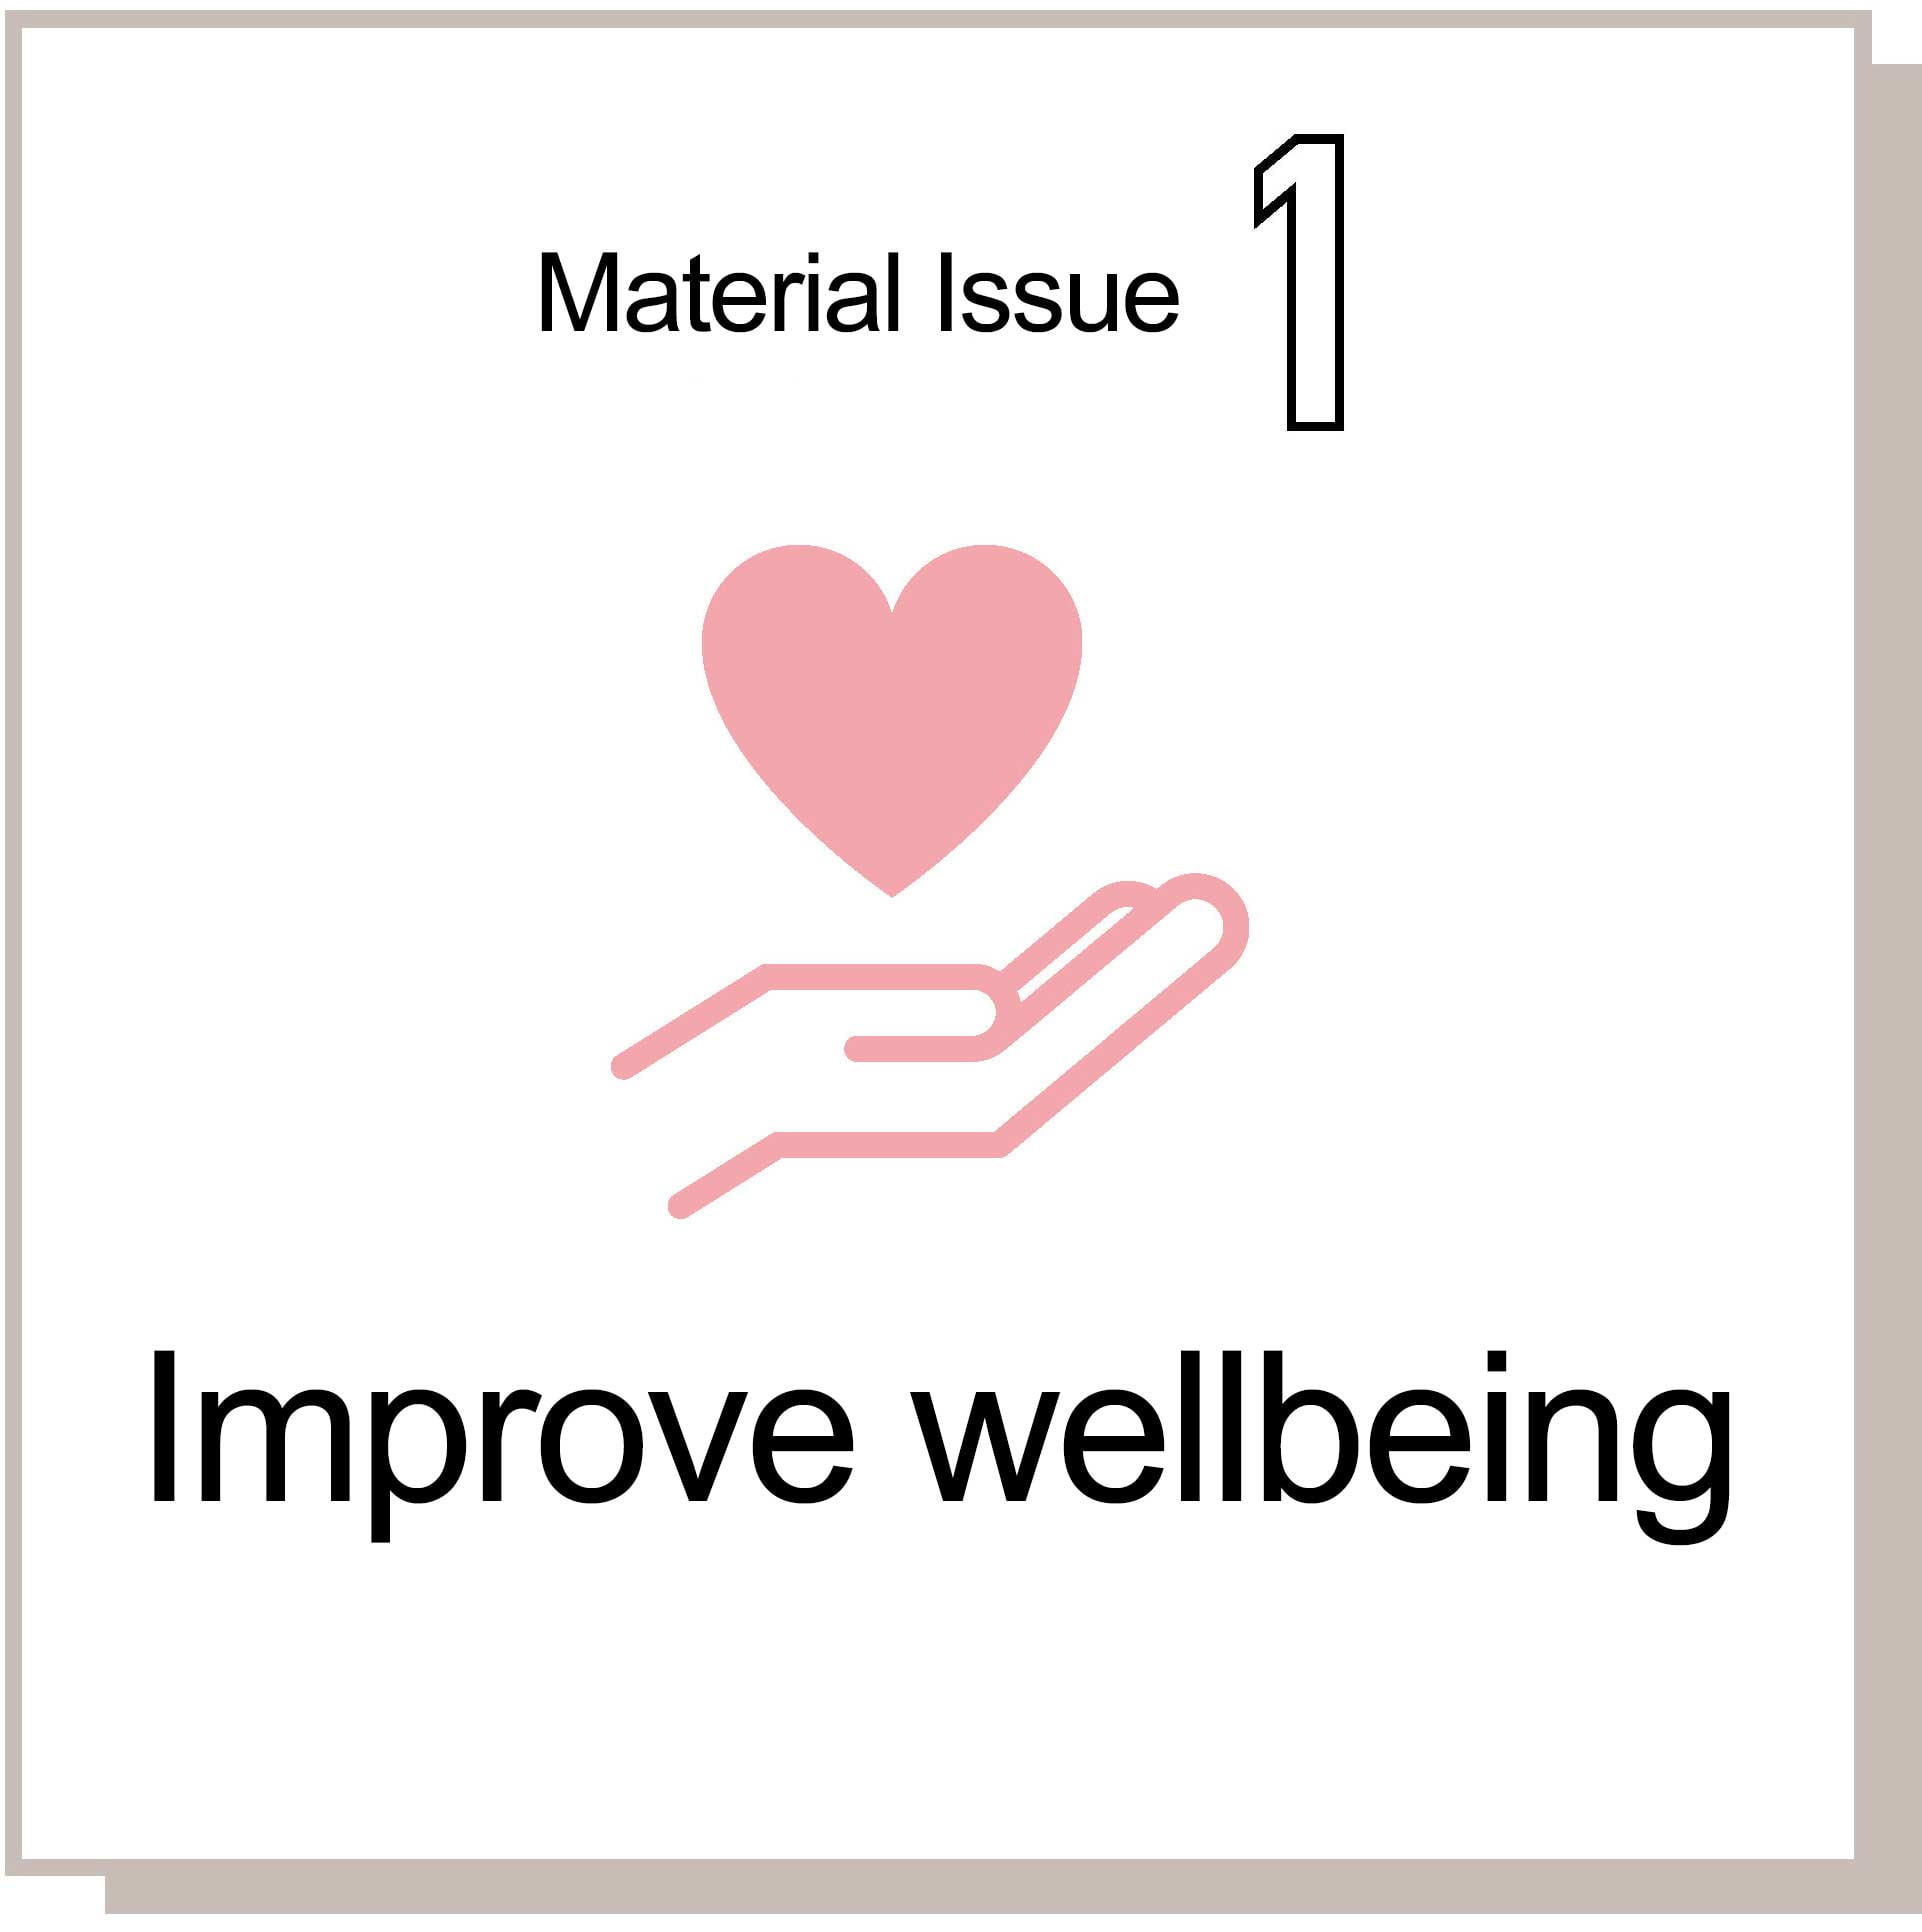 Improve wellbeing